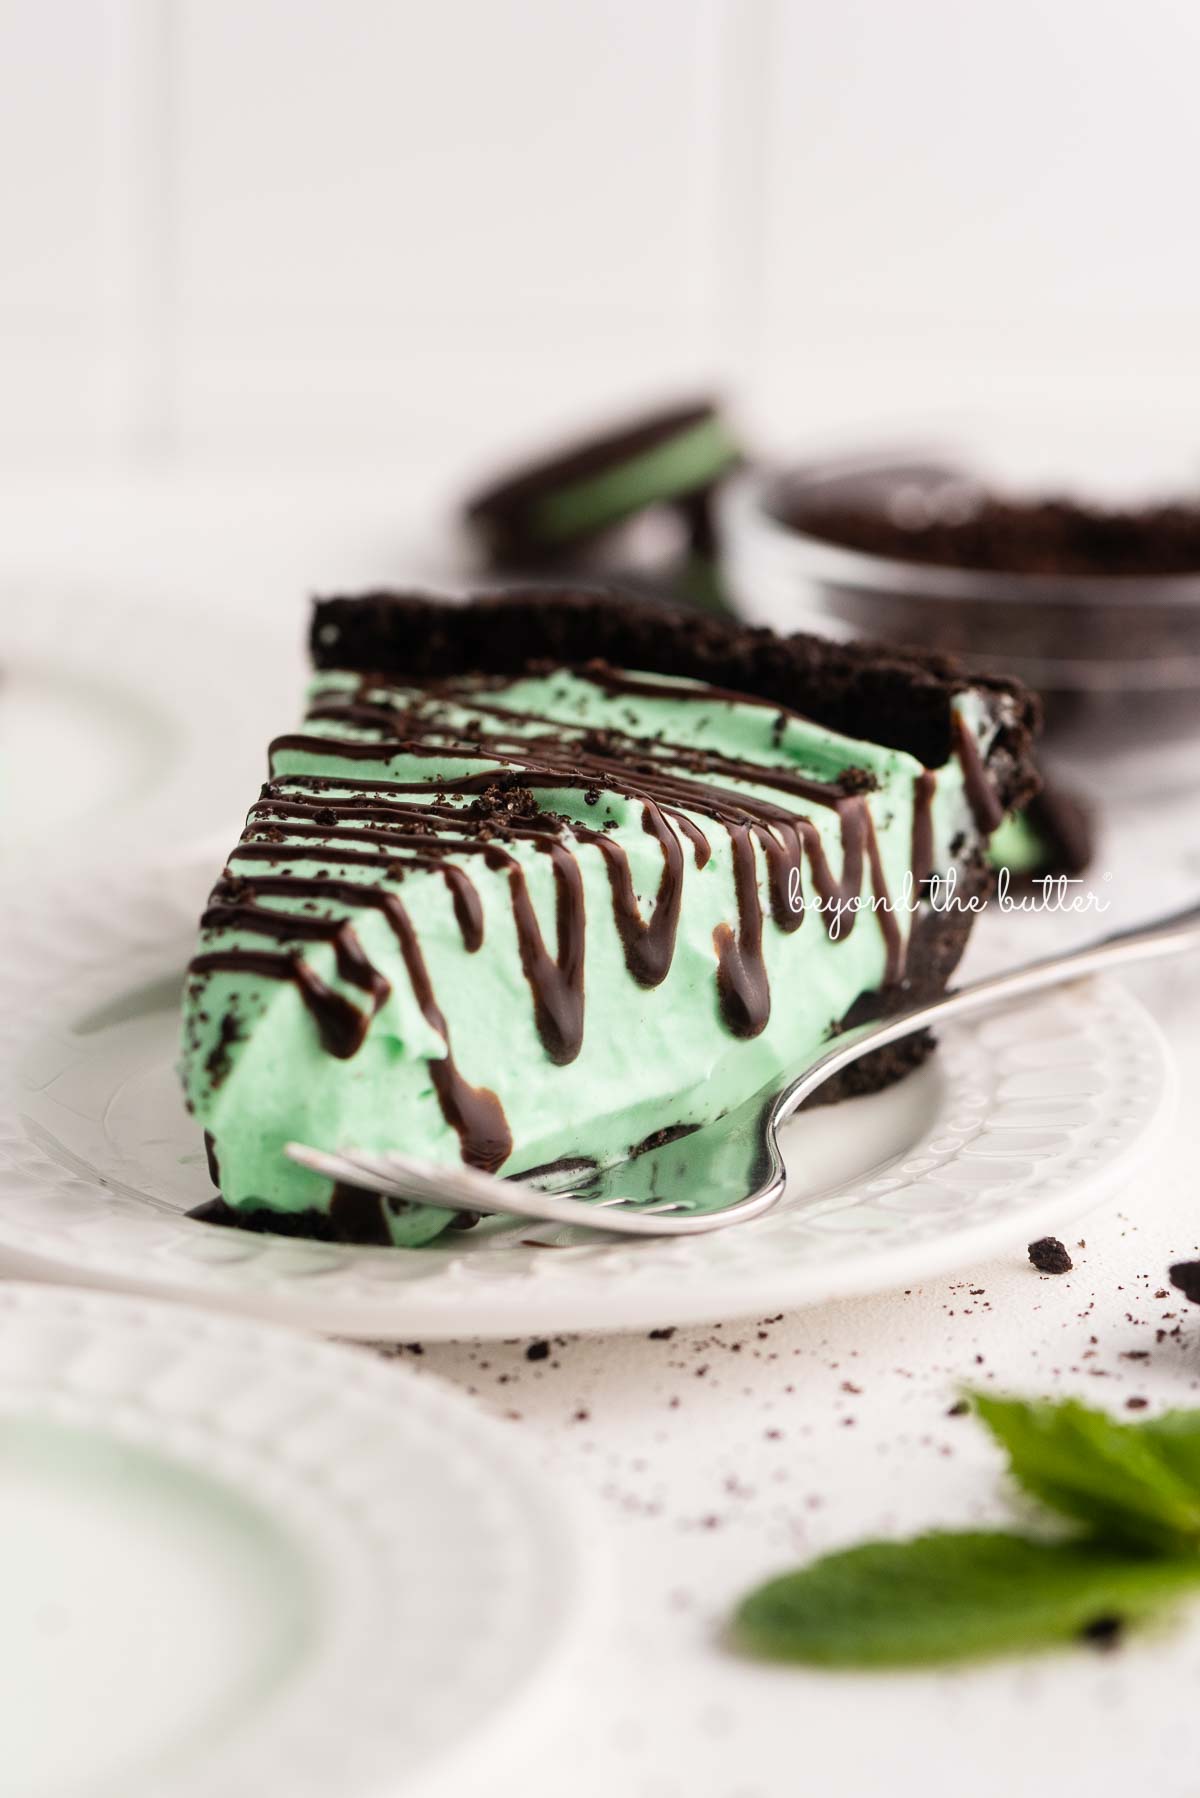 Dessert plates with slices of no bake mint chocolate pie with chocolate syrup drizzled over the top | © Beyond the Butter®